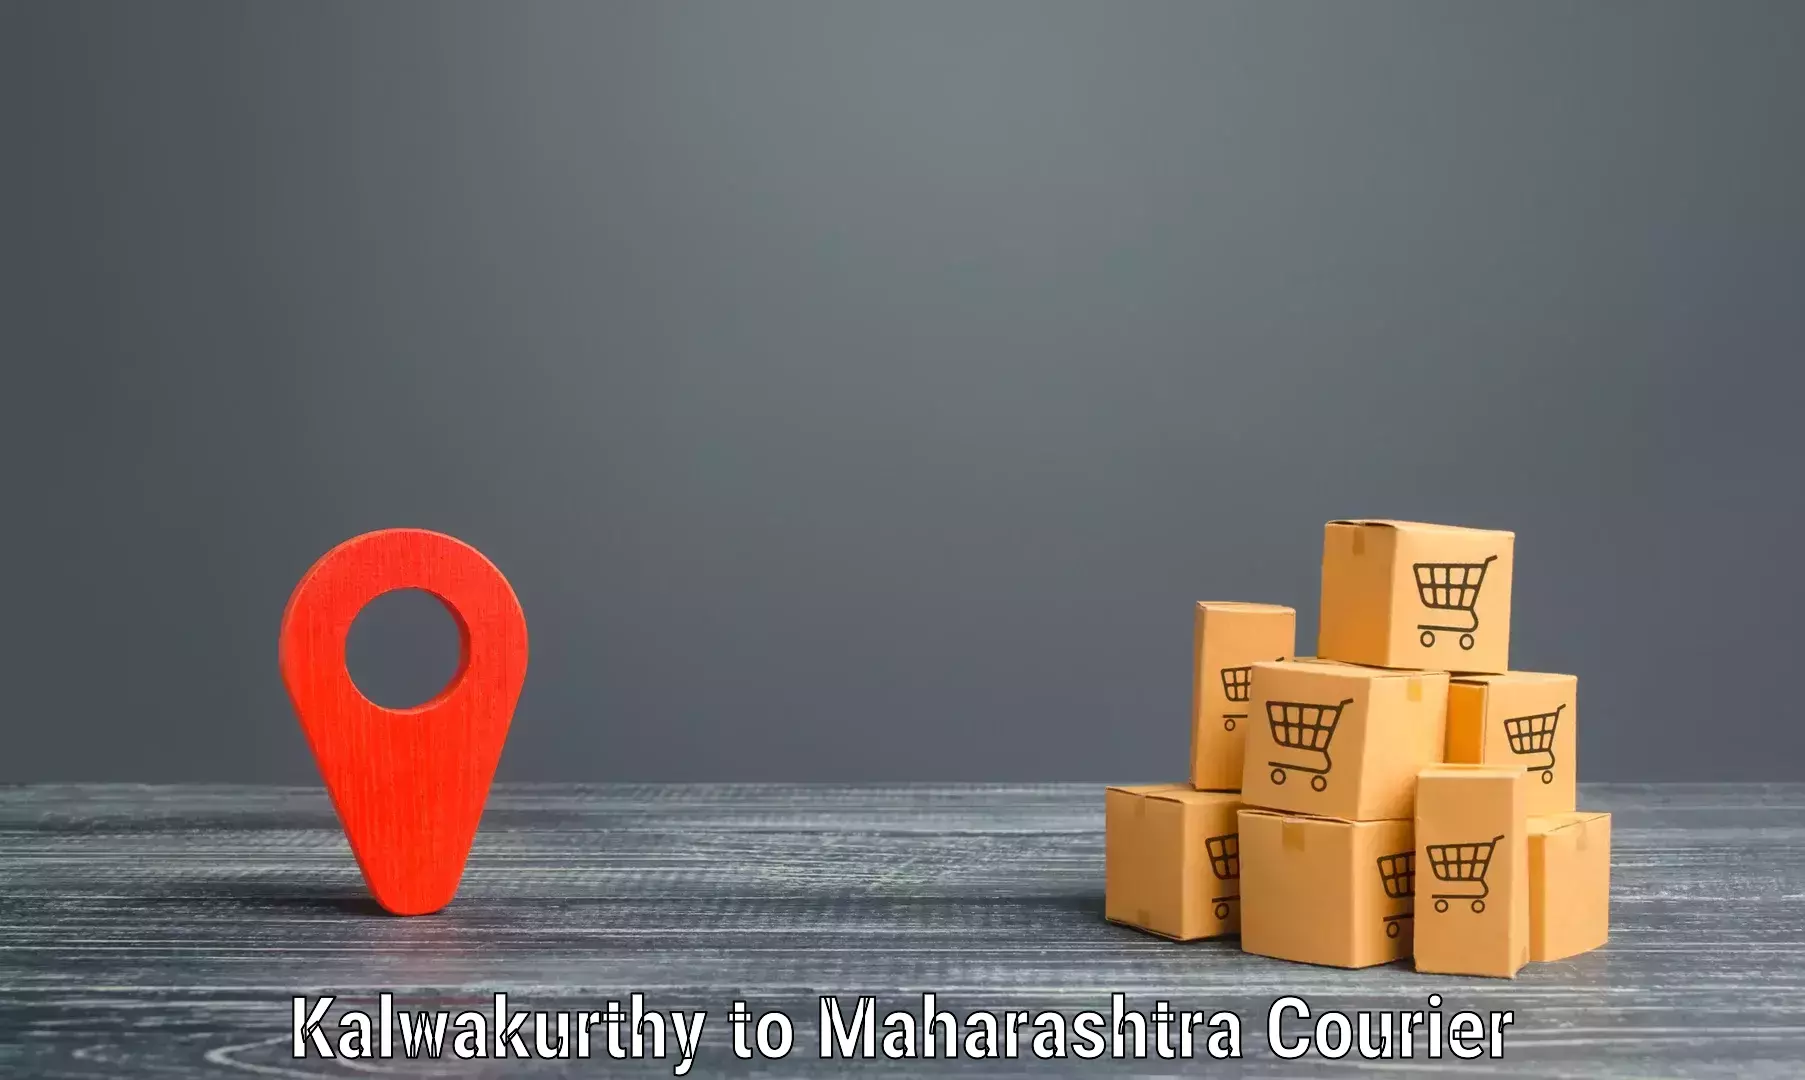 Reliable courier service Kalwakurthy to Andheri